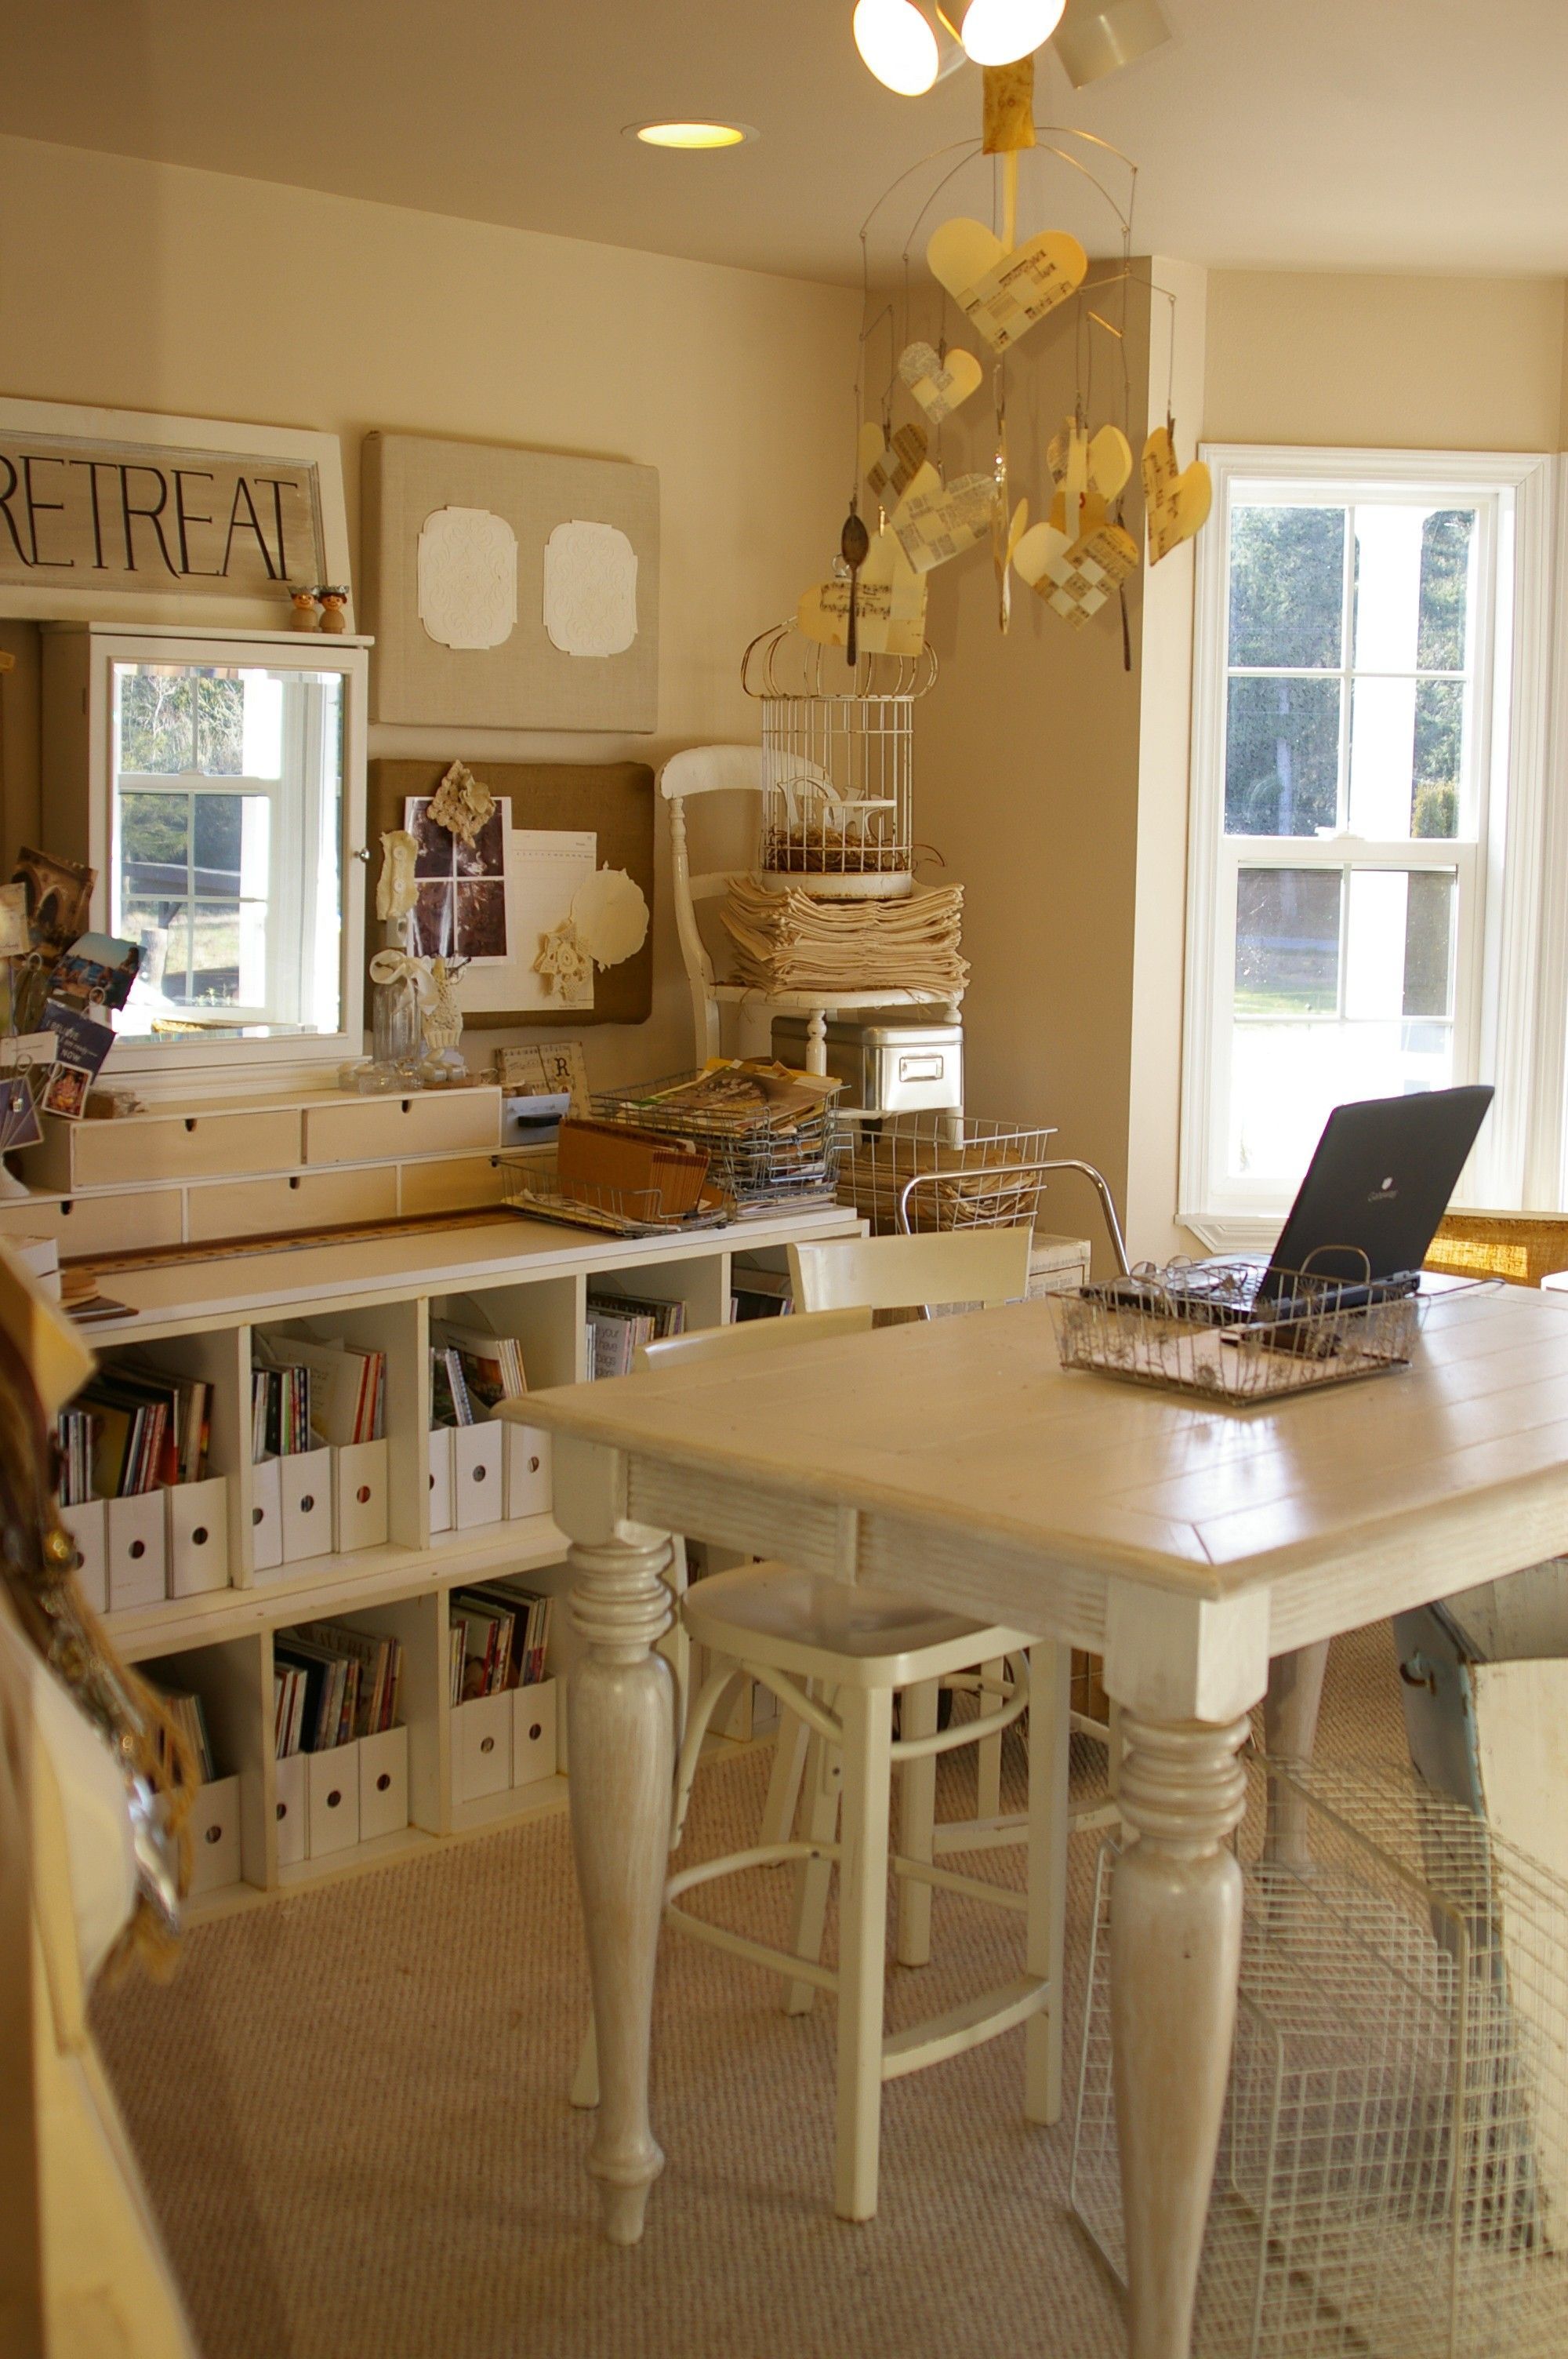 Home office art craft room, white to off white. Great storage and pretty table.